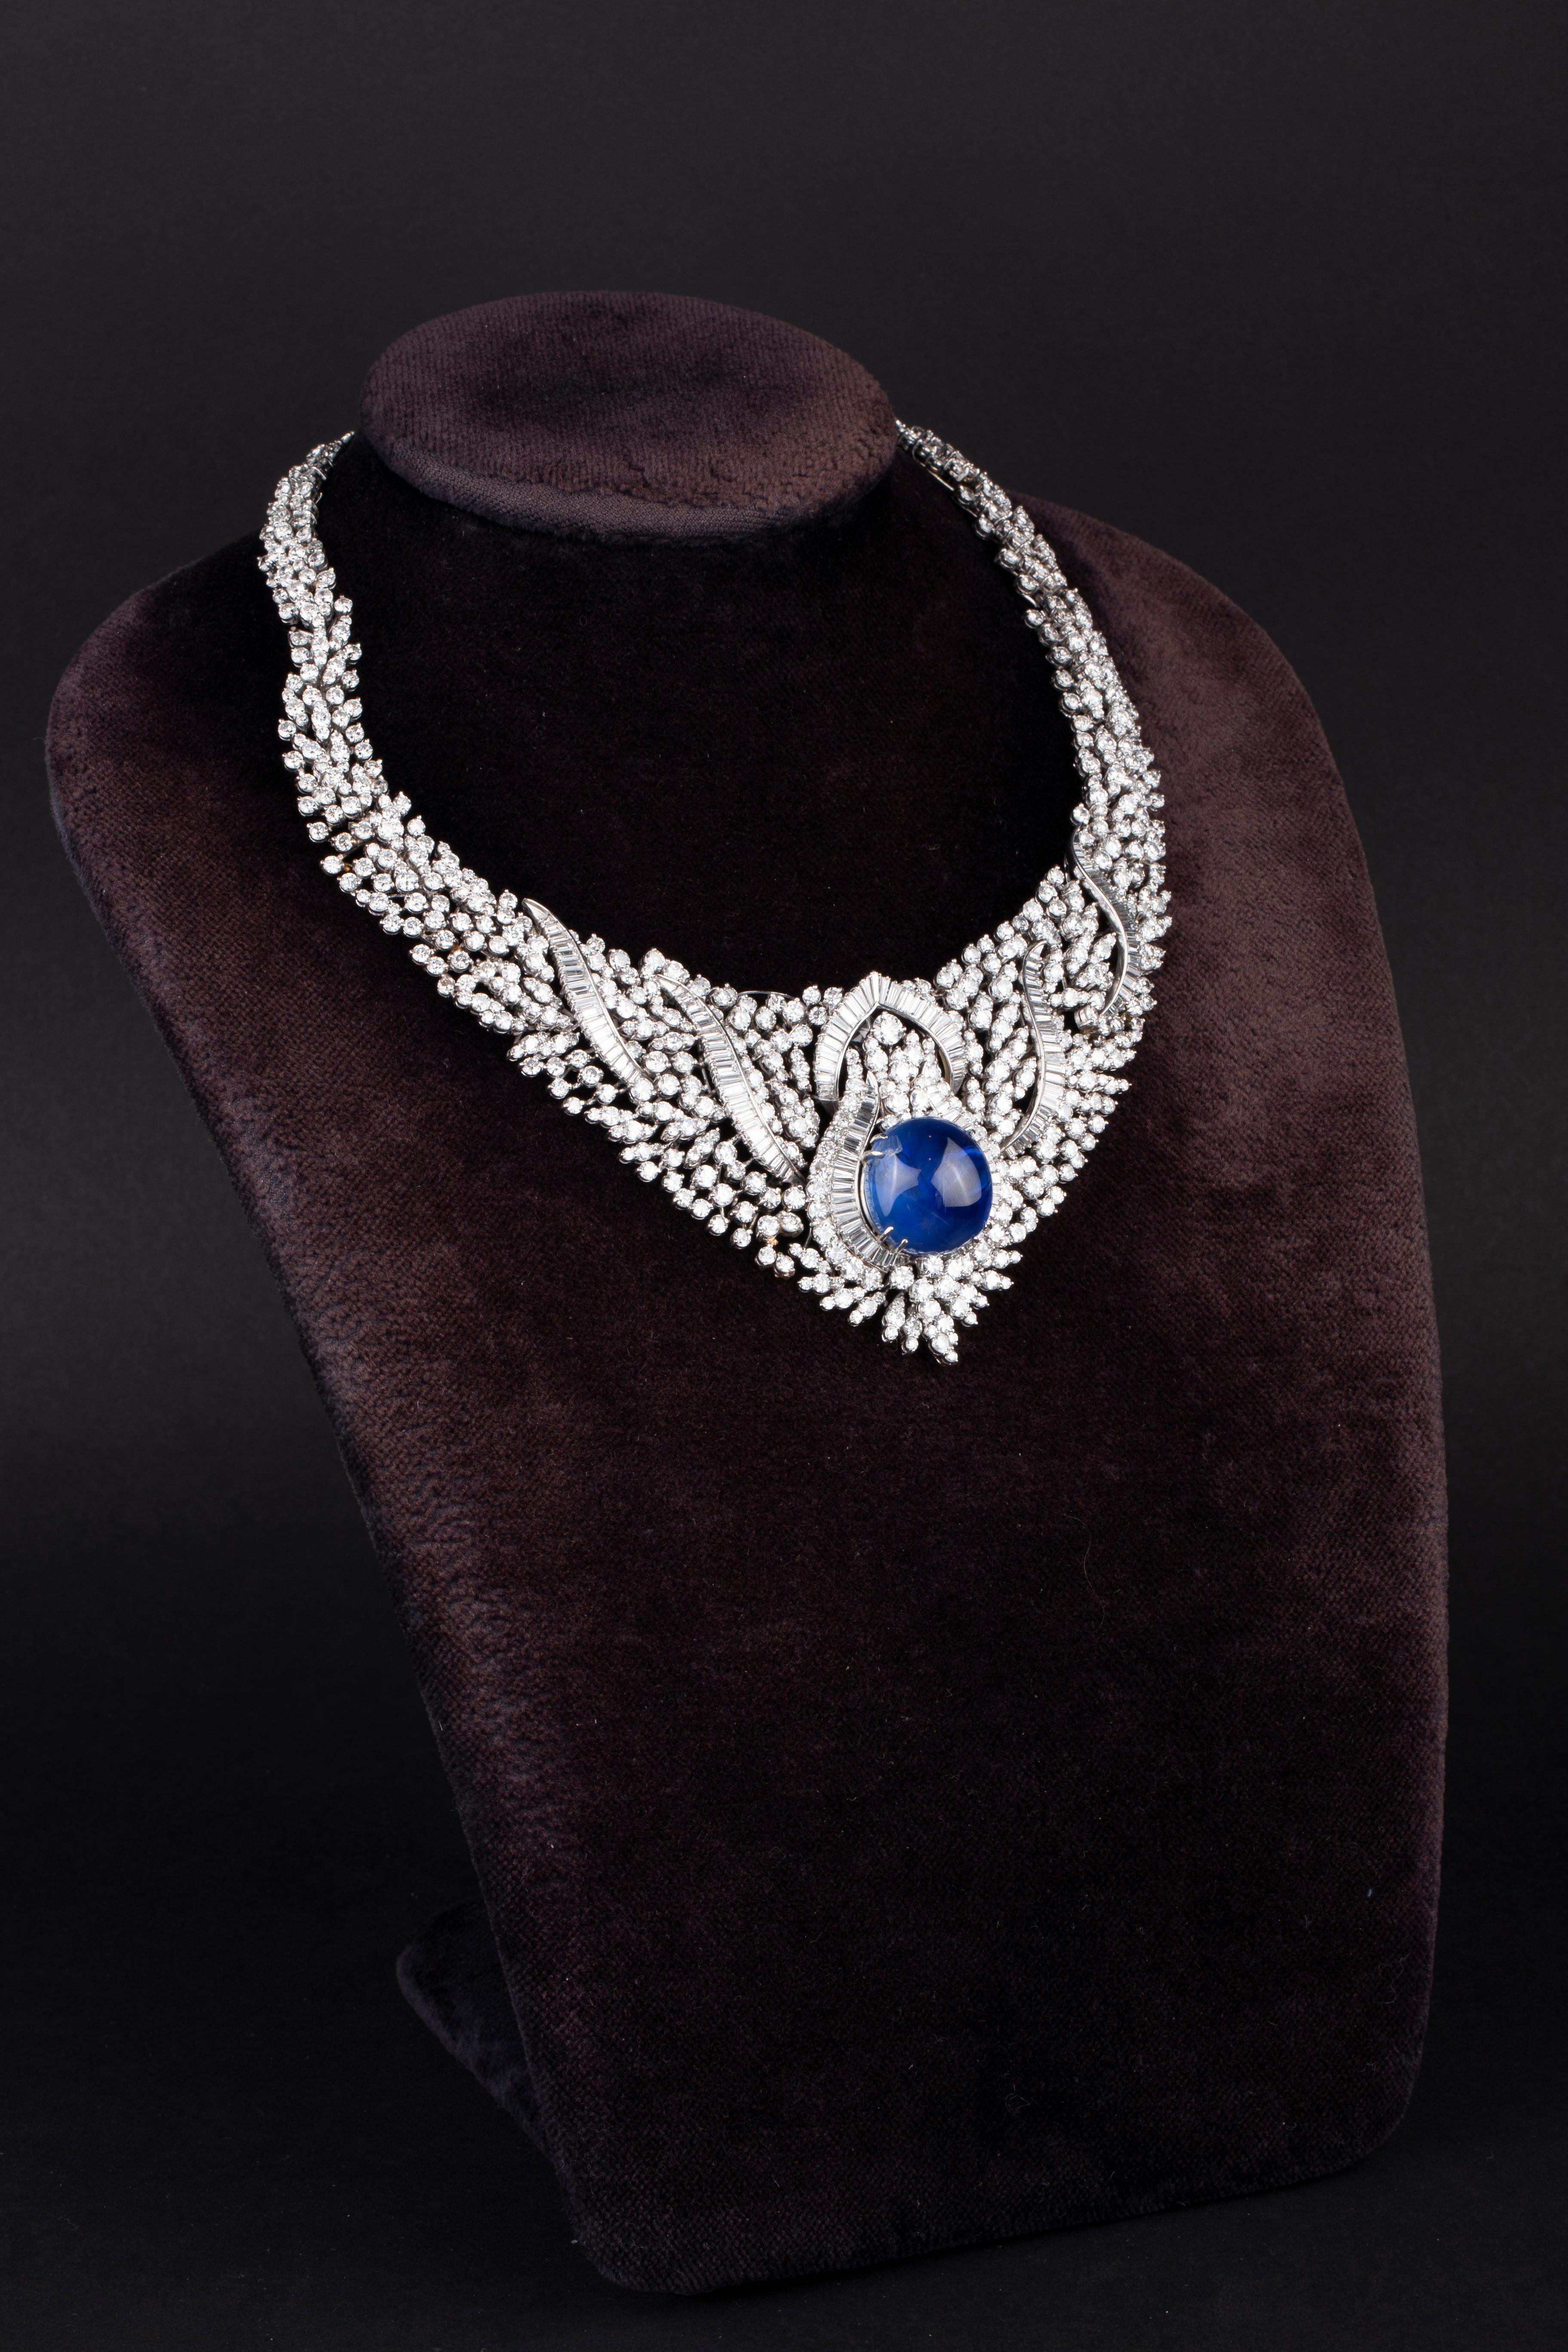 A stunning bib necklace in white gold centering a 39.4 carat blue cabochon sapphire framed by 50 carats of round brilliant and emerald cut diamonds. Um 1950er Jahre.